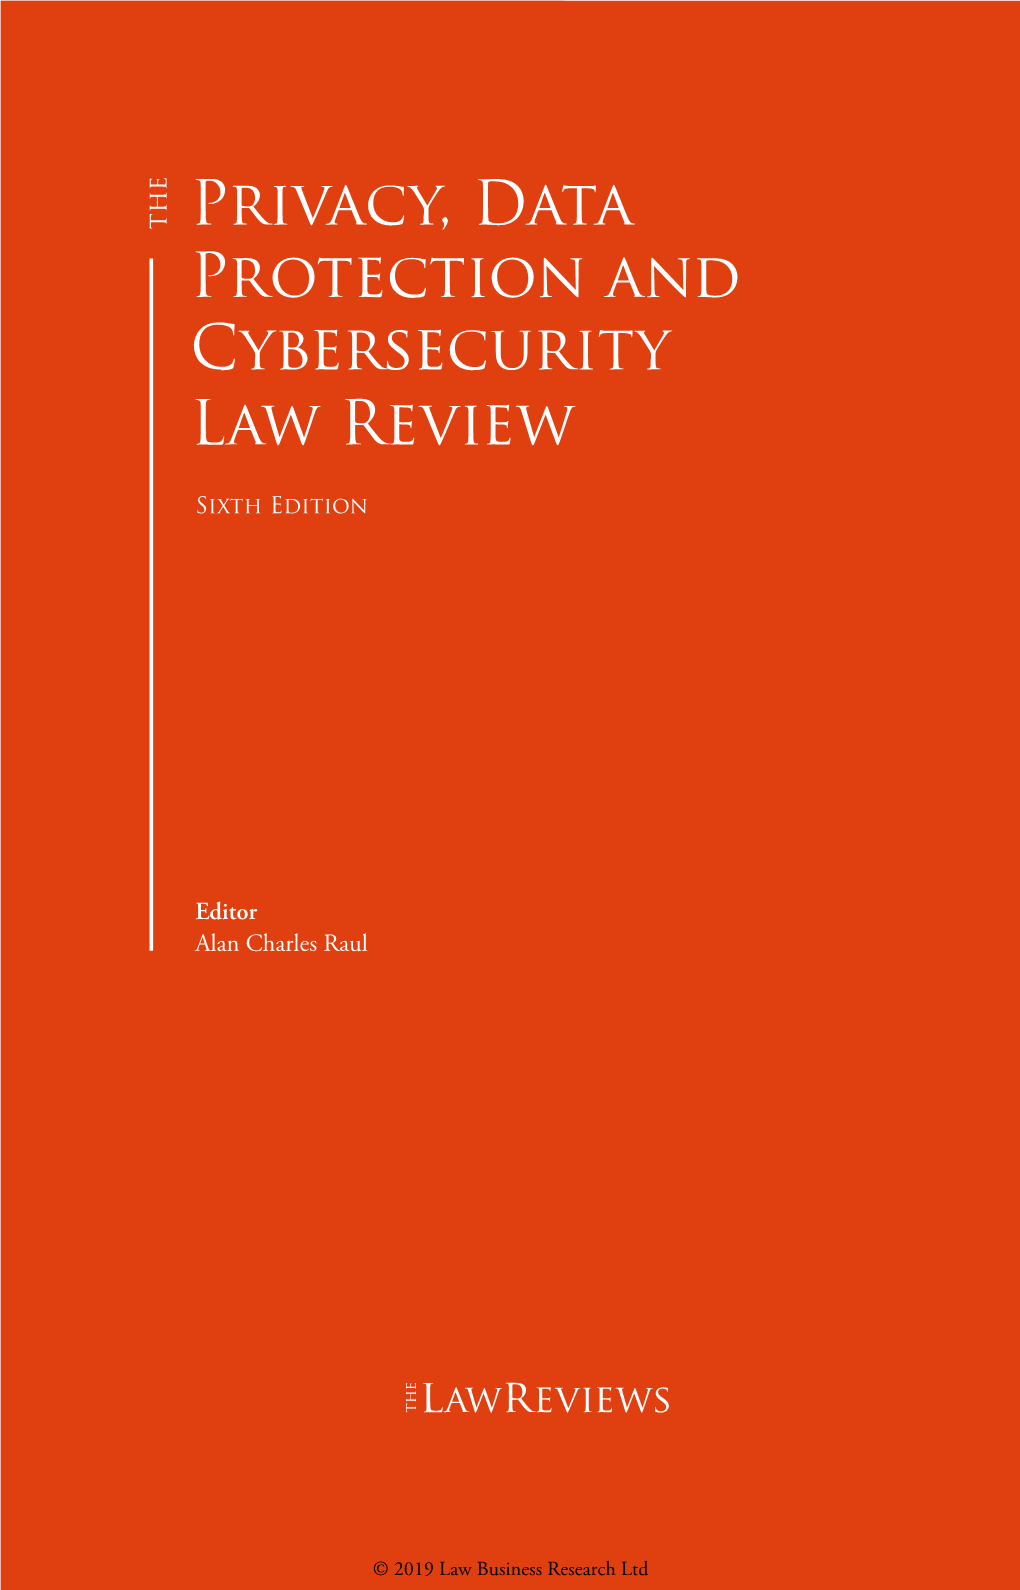 Privacy, Data Protection and Cybersecurity Law Review